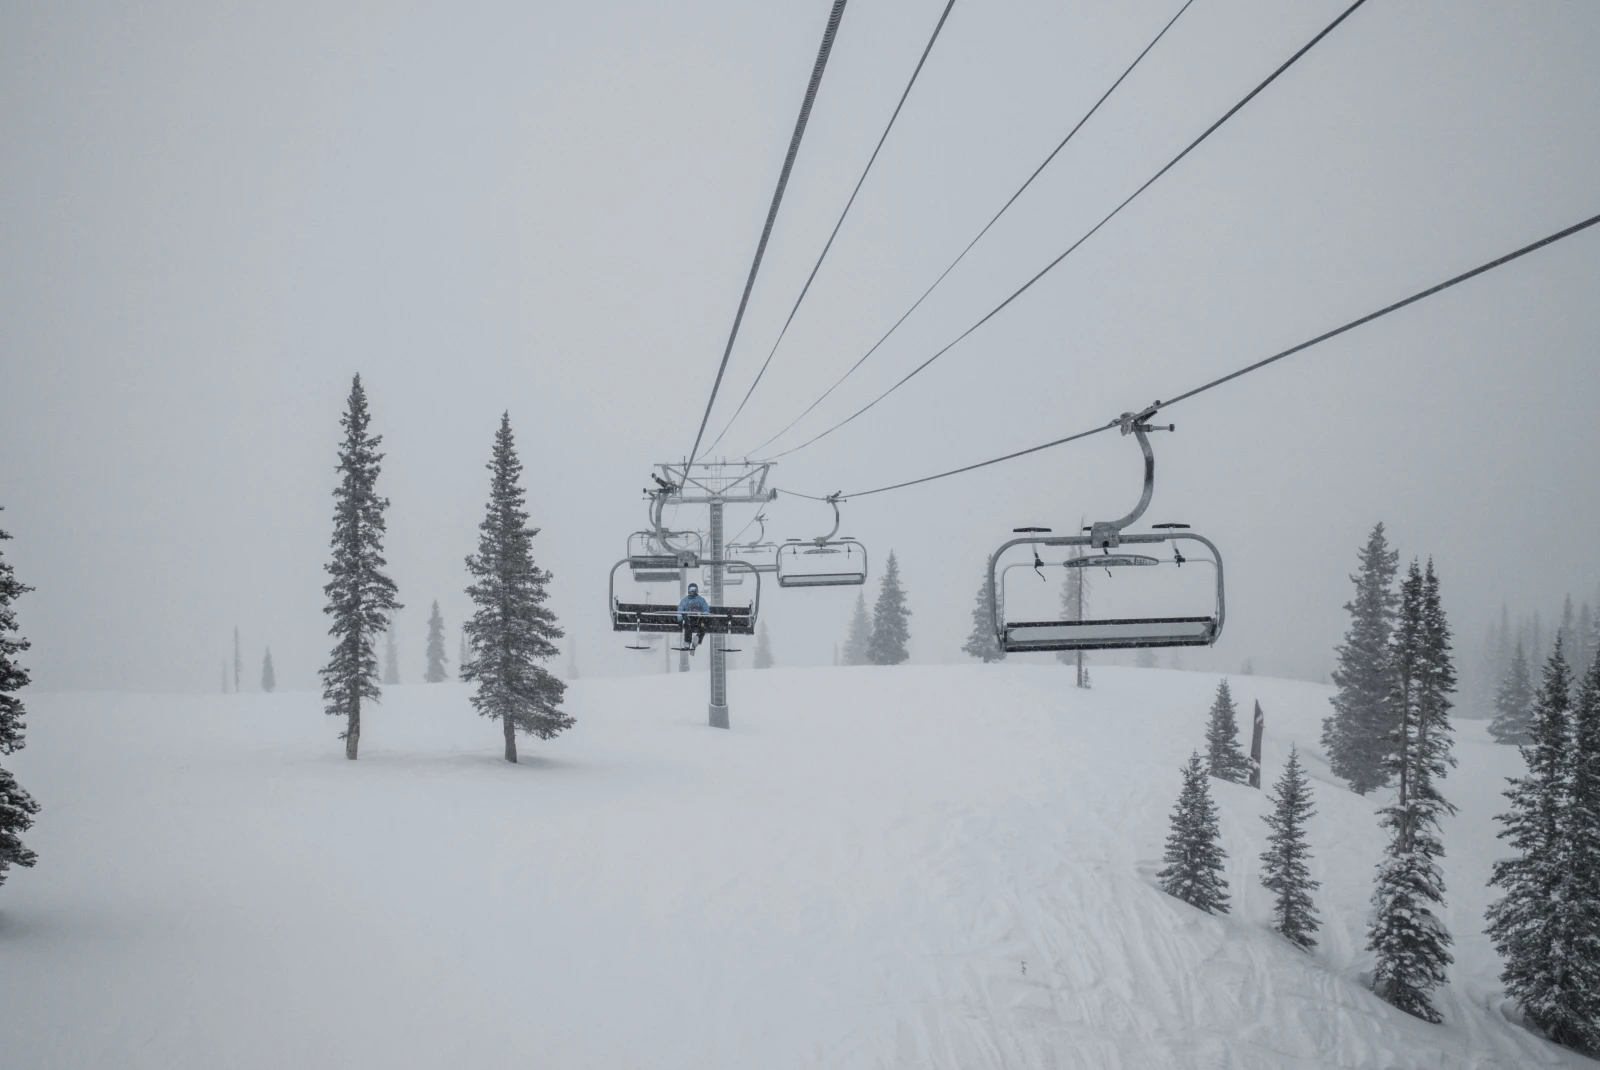 Snowy mountain with trees and a ski lift with cloudy skies